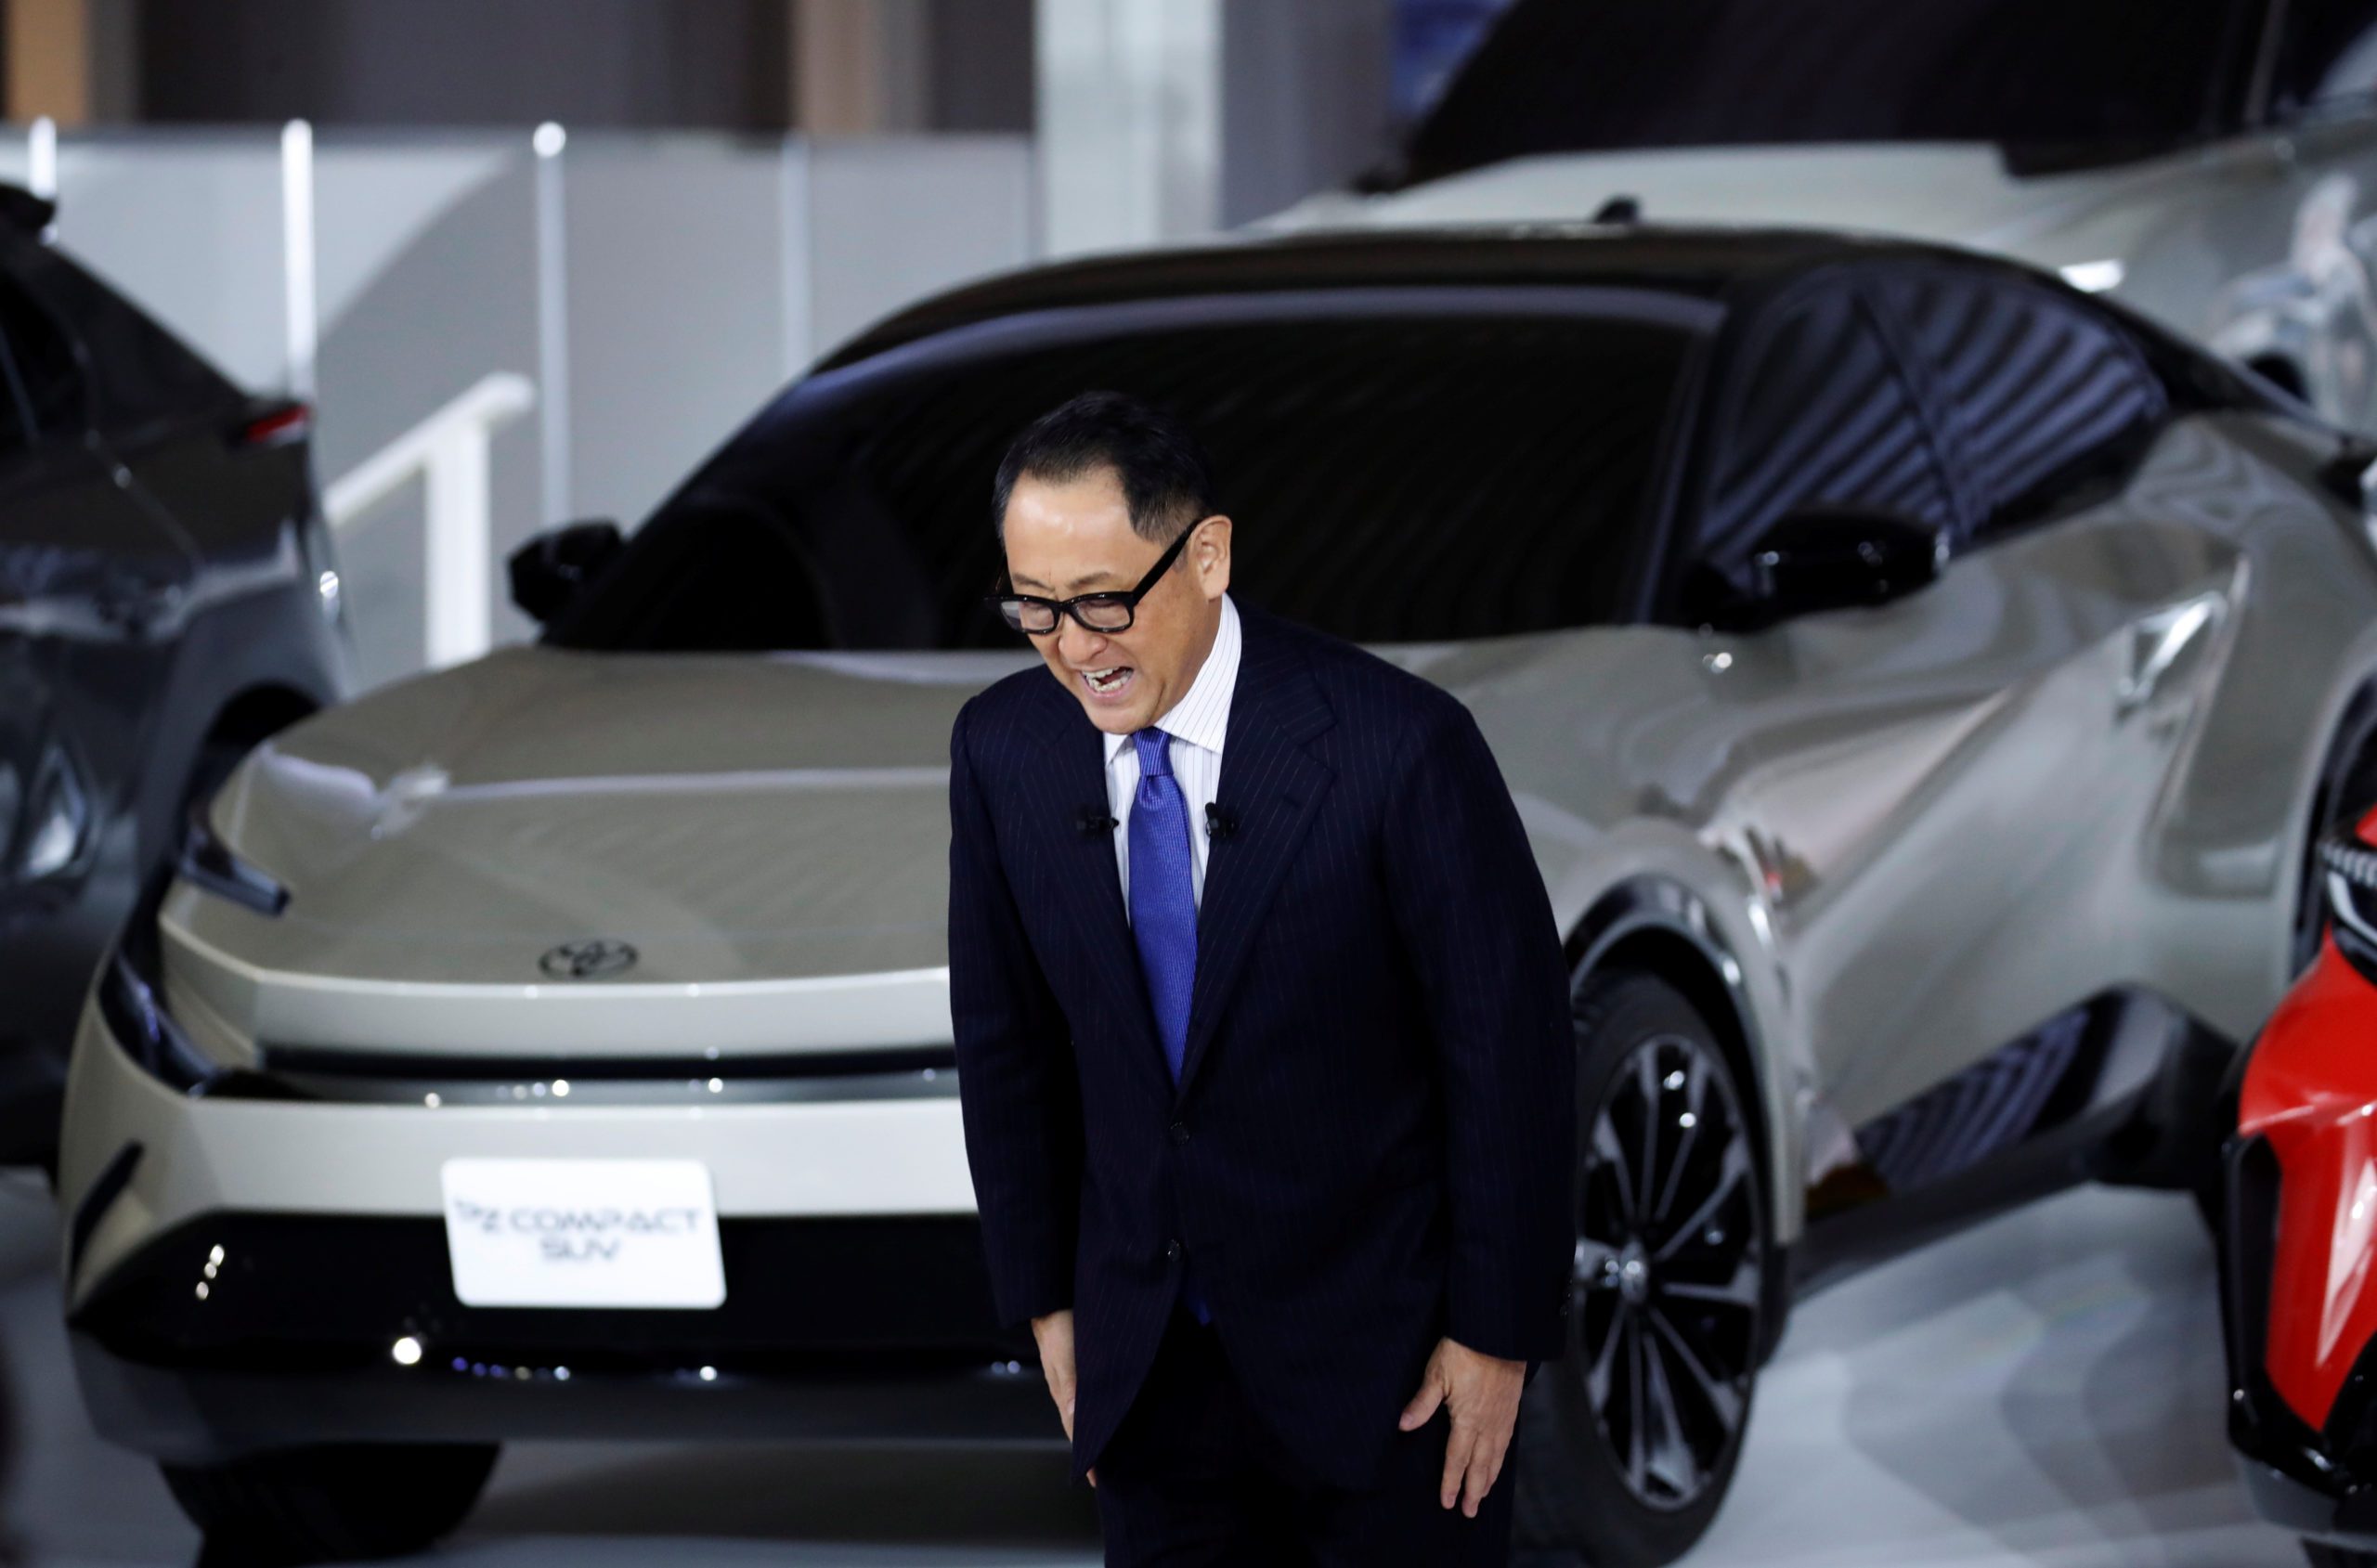 California, New York public pension funds vote against Toyota chairman